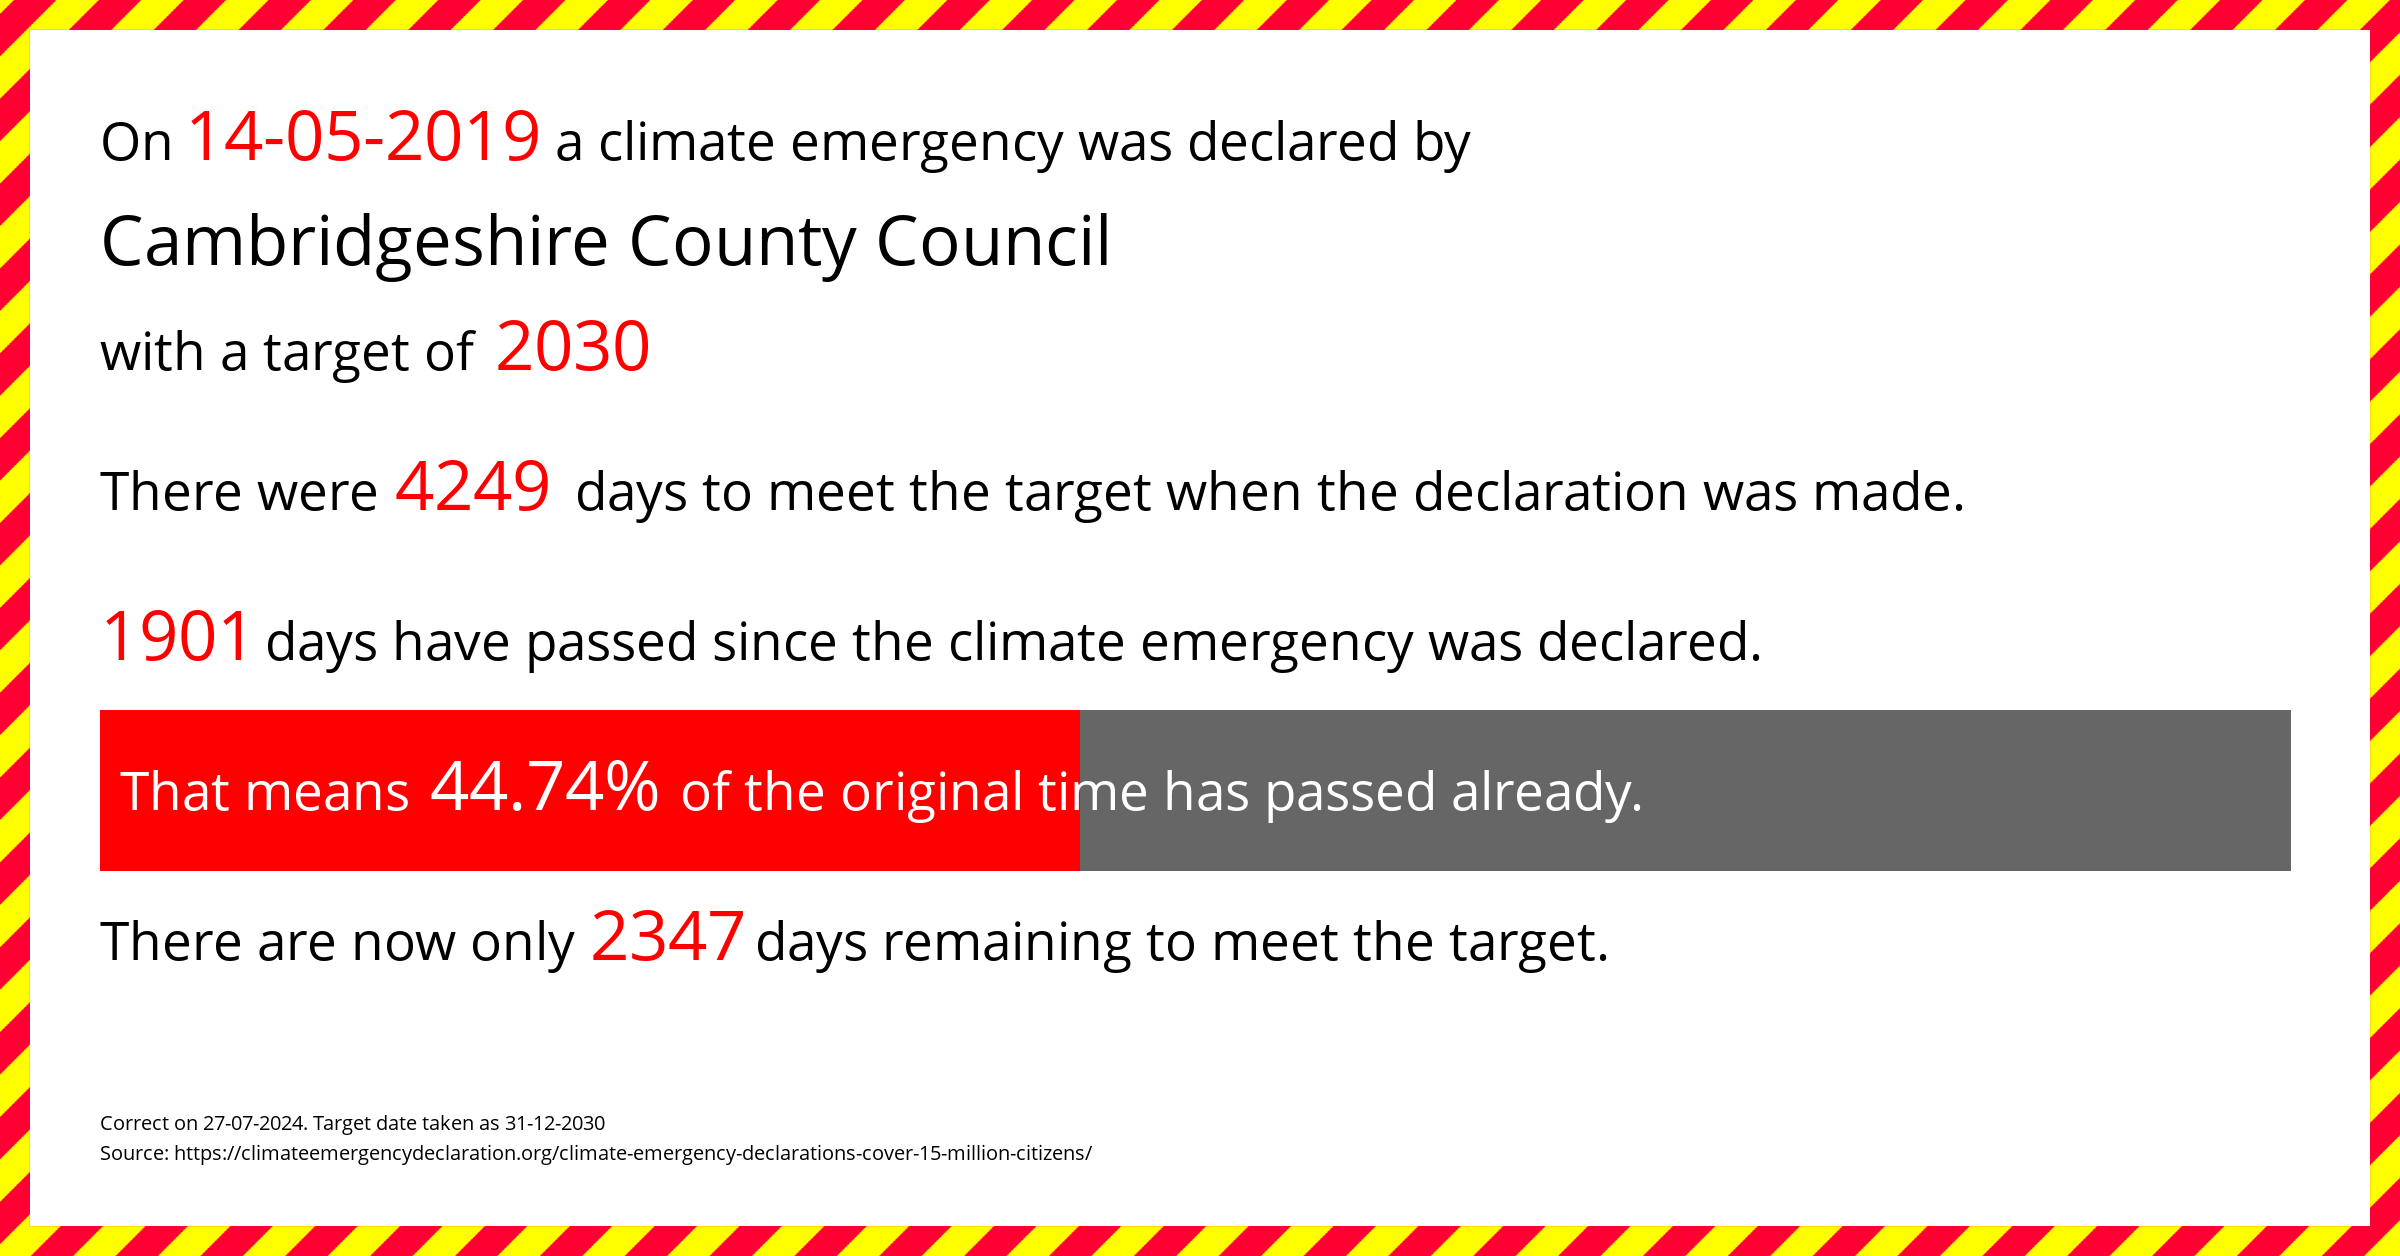 Cambridgeshire County Council declared a Climate emergency on Tuesday 14th May 2019, with a target of 2030.